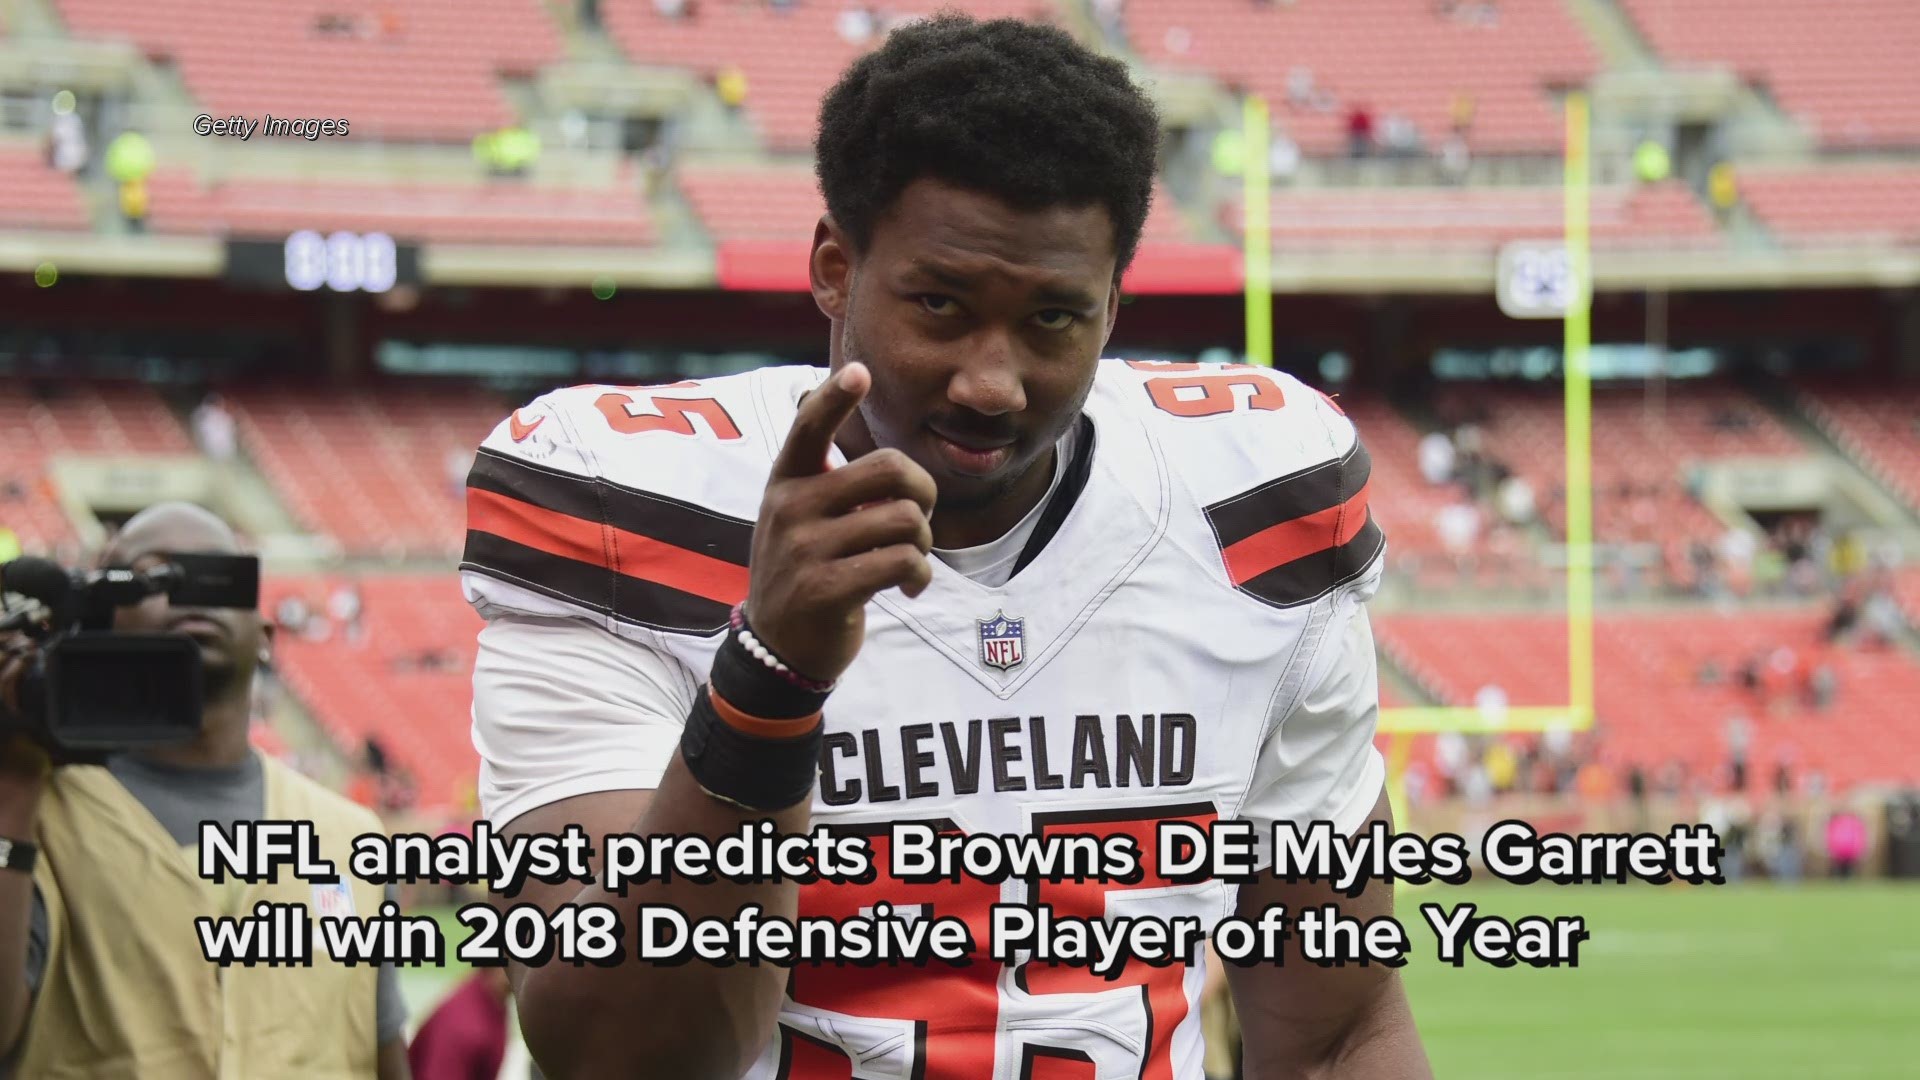 NFL analyst predicts Cleveland Browns DE Myles Garrett will win 2018 Defensive Player of the Year